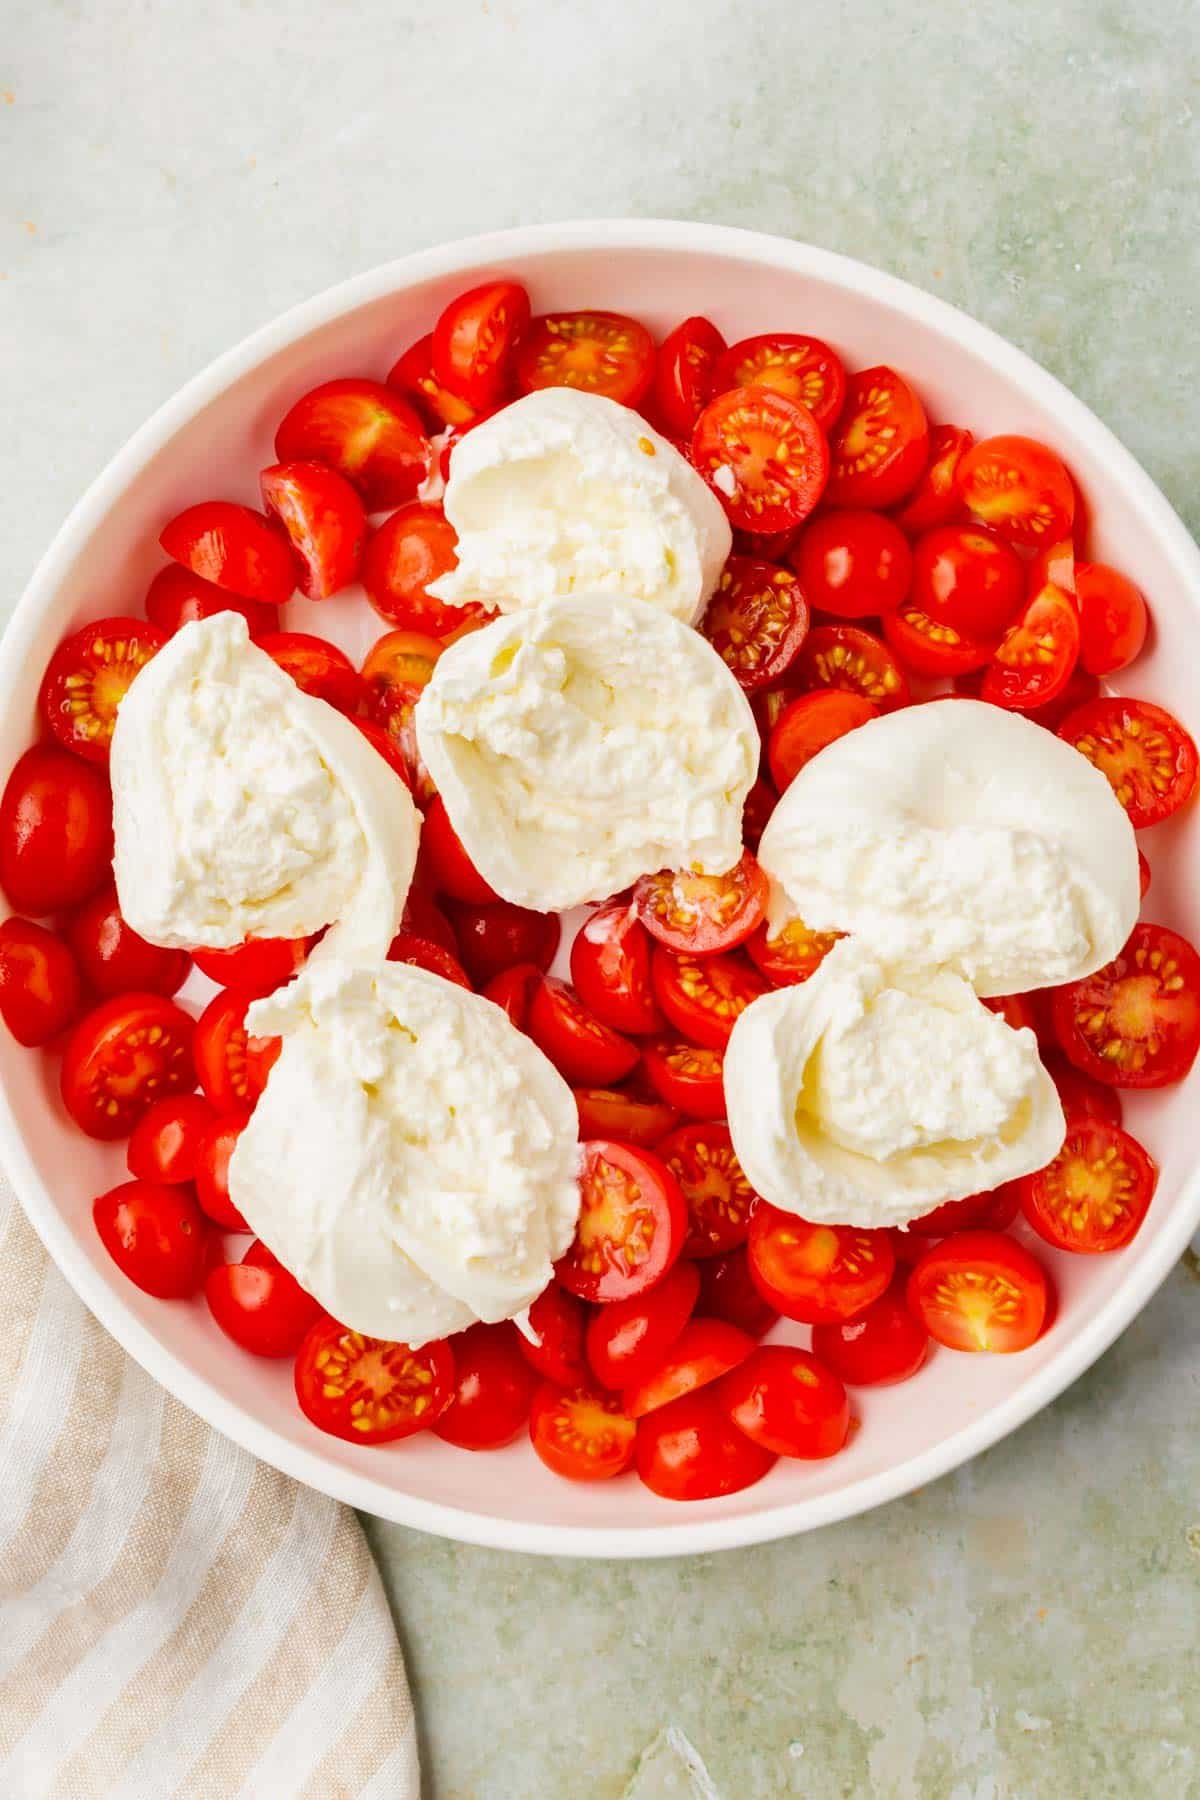 An overhead view of a shallow bowl with sliced cherry tomatoes and burrata cheese.